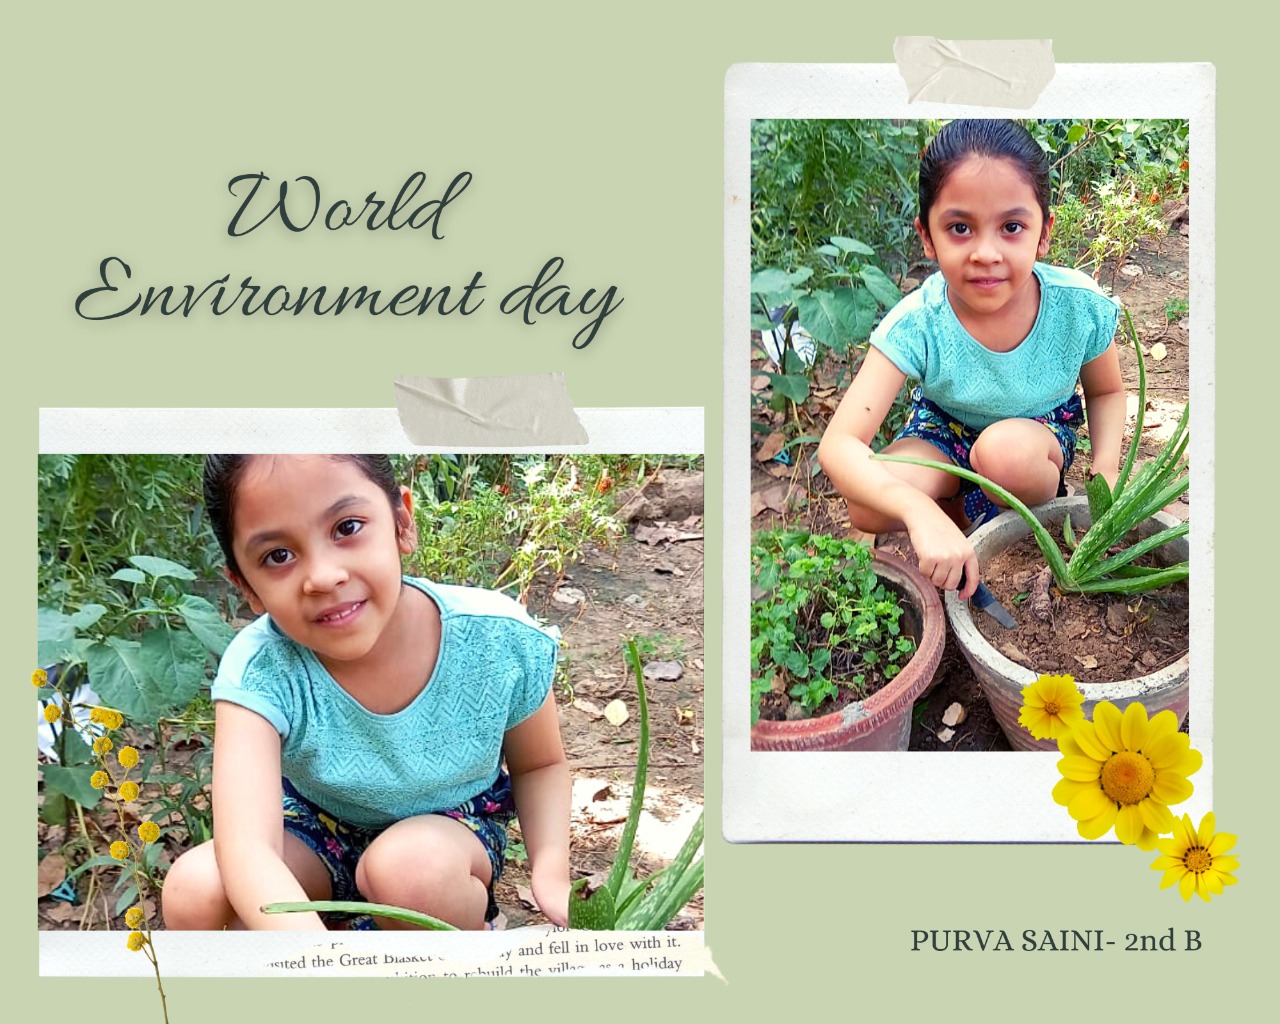 On World Environment Day beautiful musical dance performance depicting the plight of a Tree and harmful effects of pollution, by Smiling Tree's green warrior Sonal, studying in Leelawanti Saraswati School.